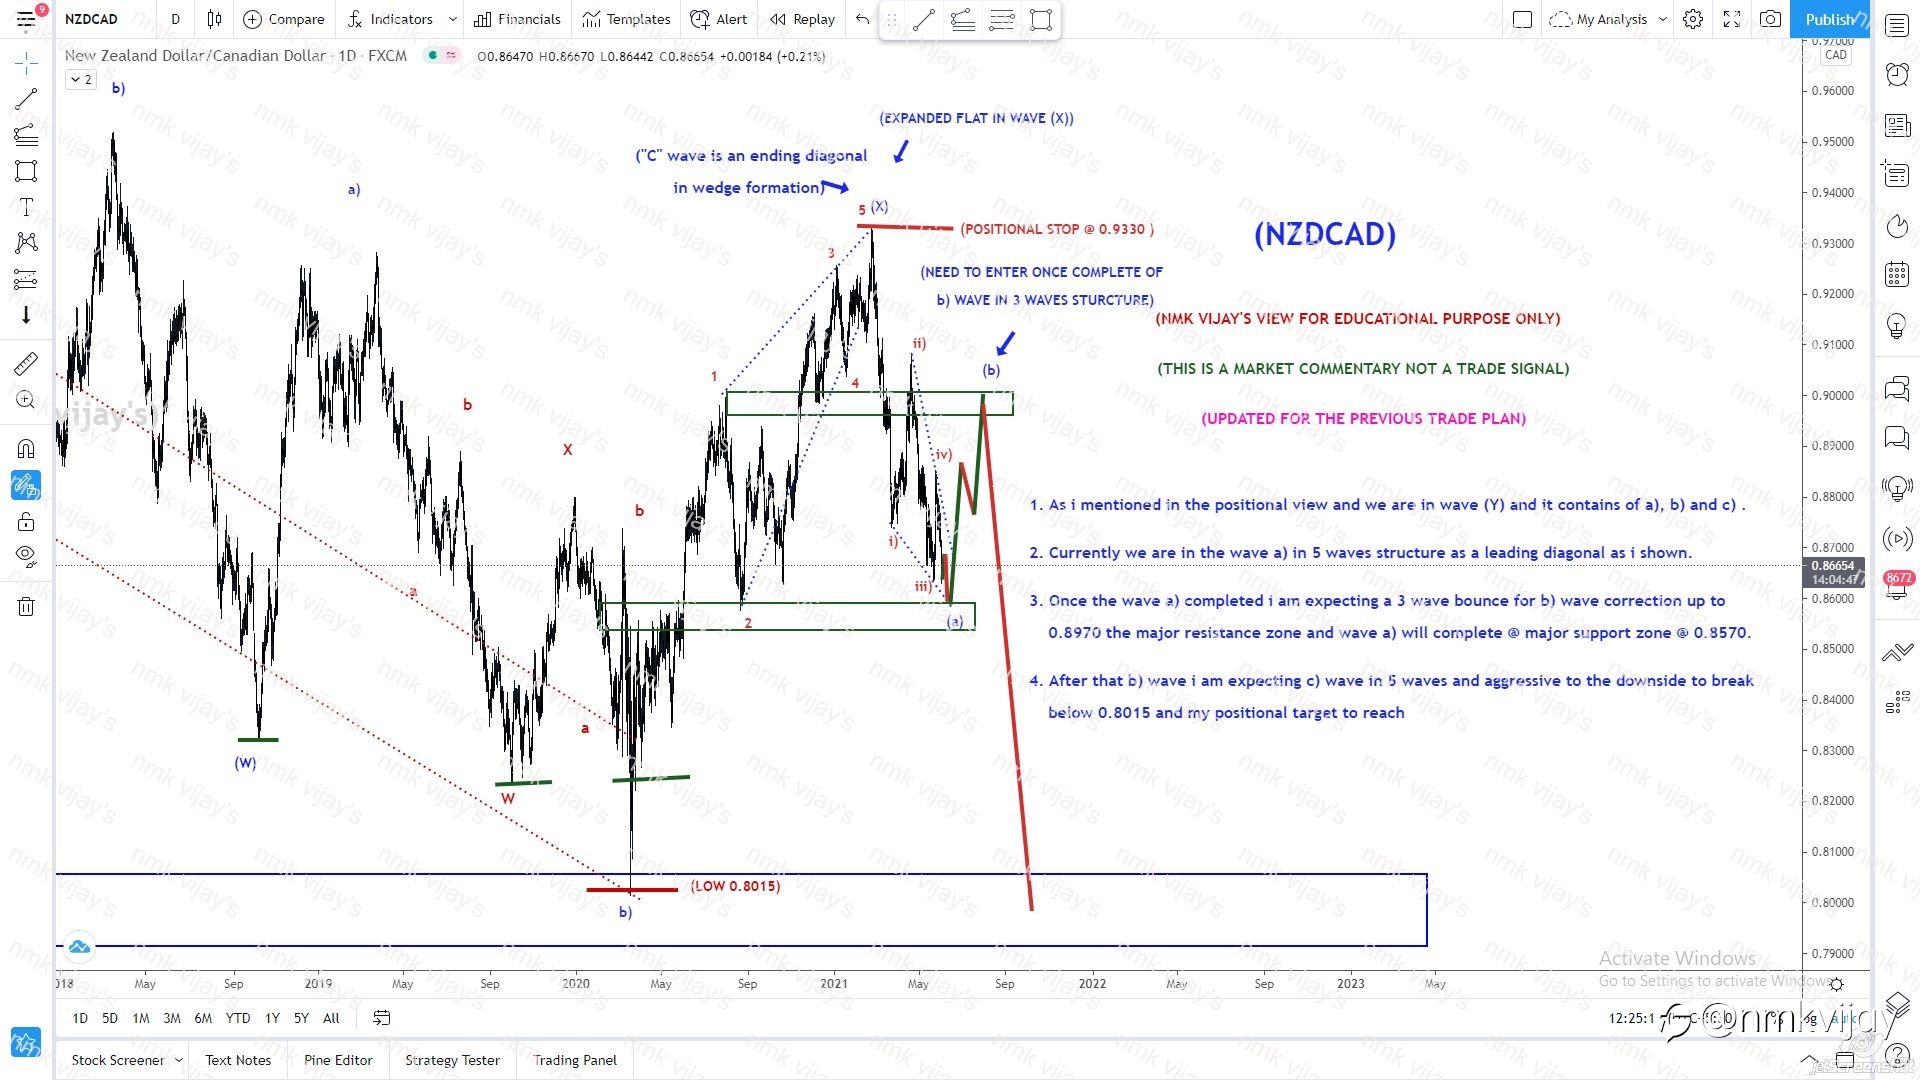 NZDCAD-Wave a) going to complete @ major support and wave b) bounce to 0.8970 in 3 waves.